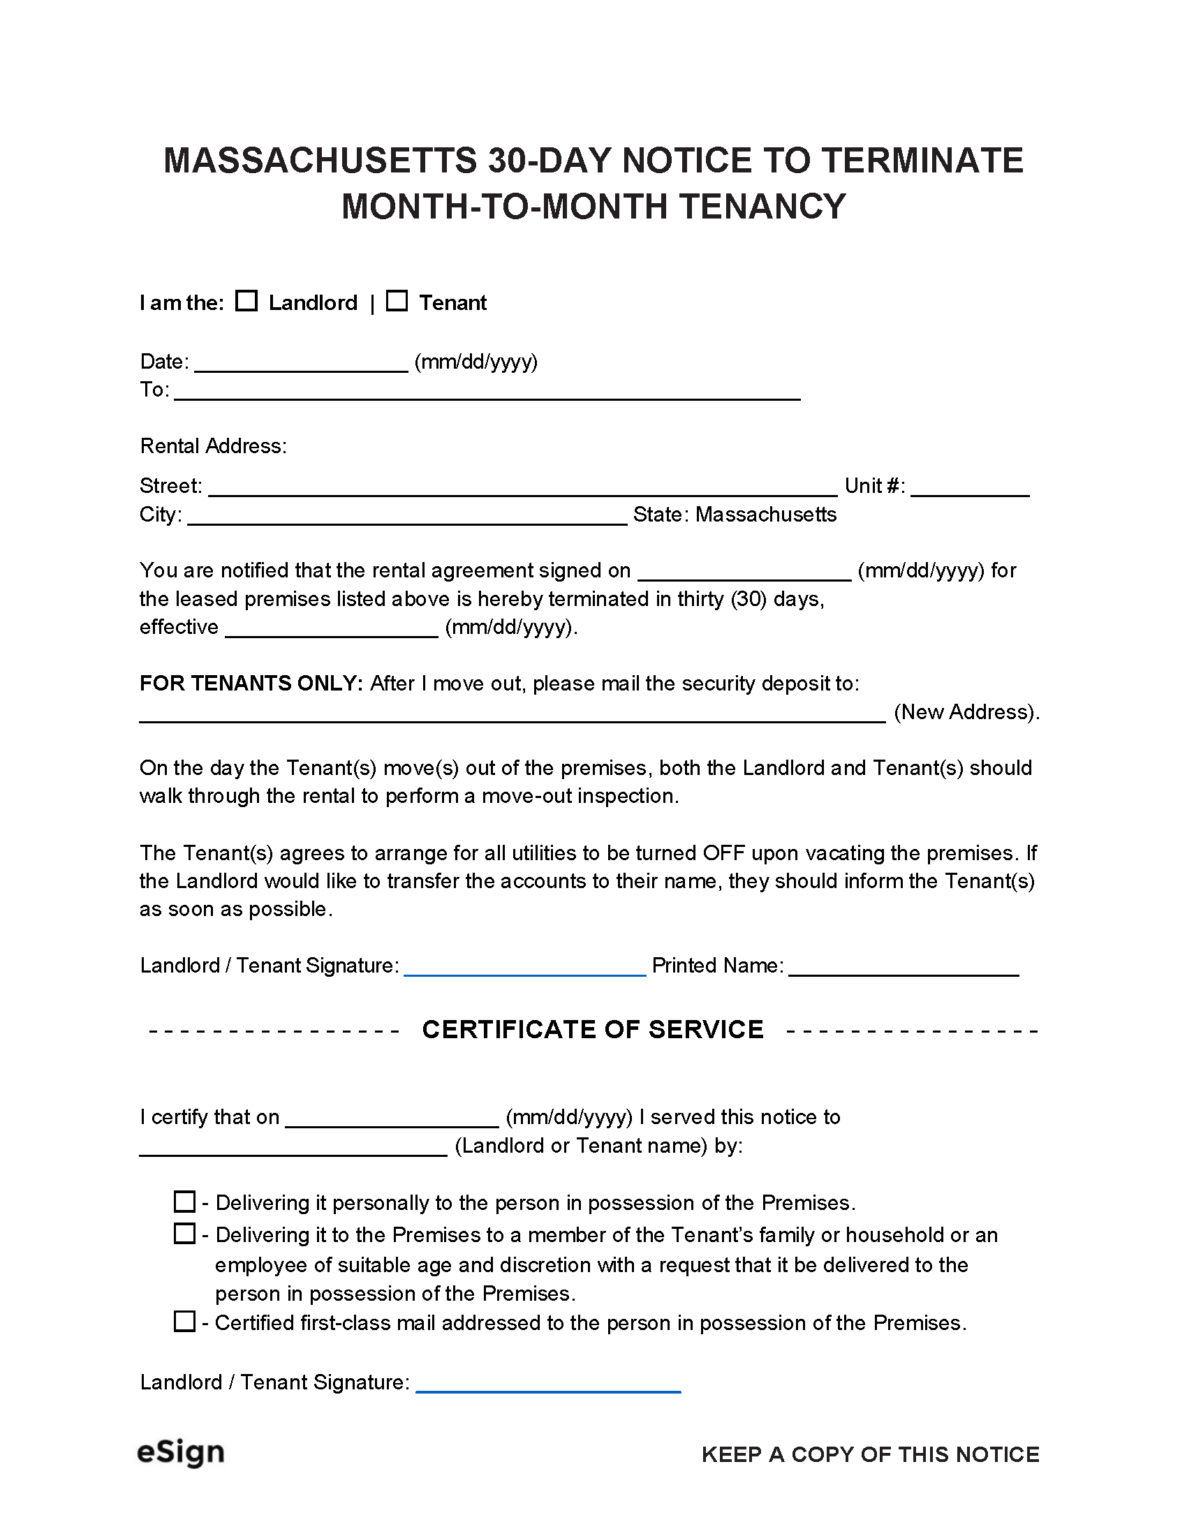 free-massachusetts-30-day-notice-to-quit-lease-termination-letter